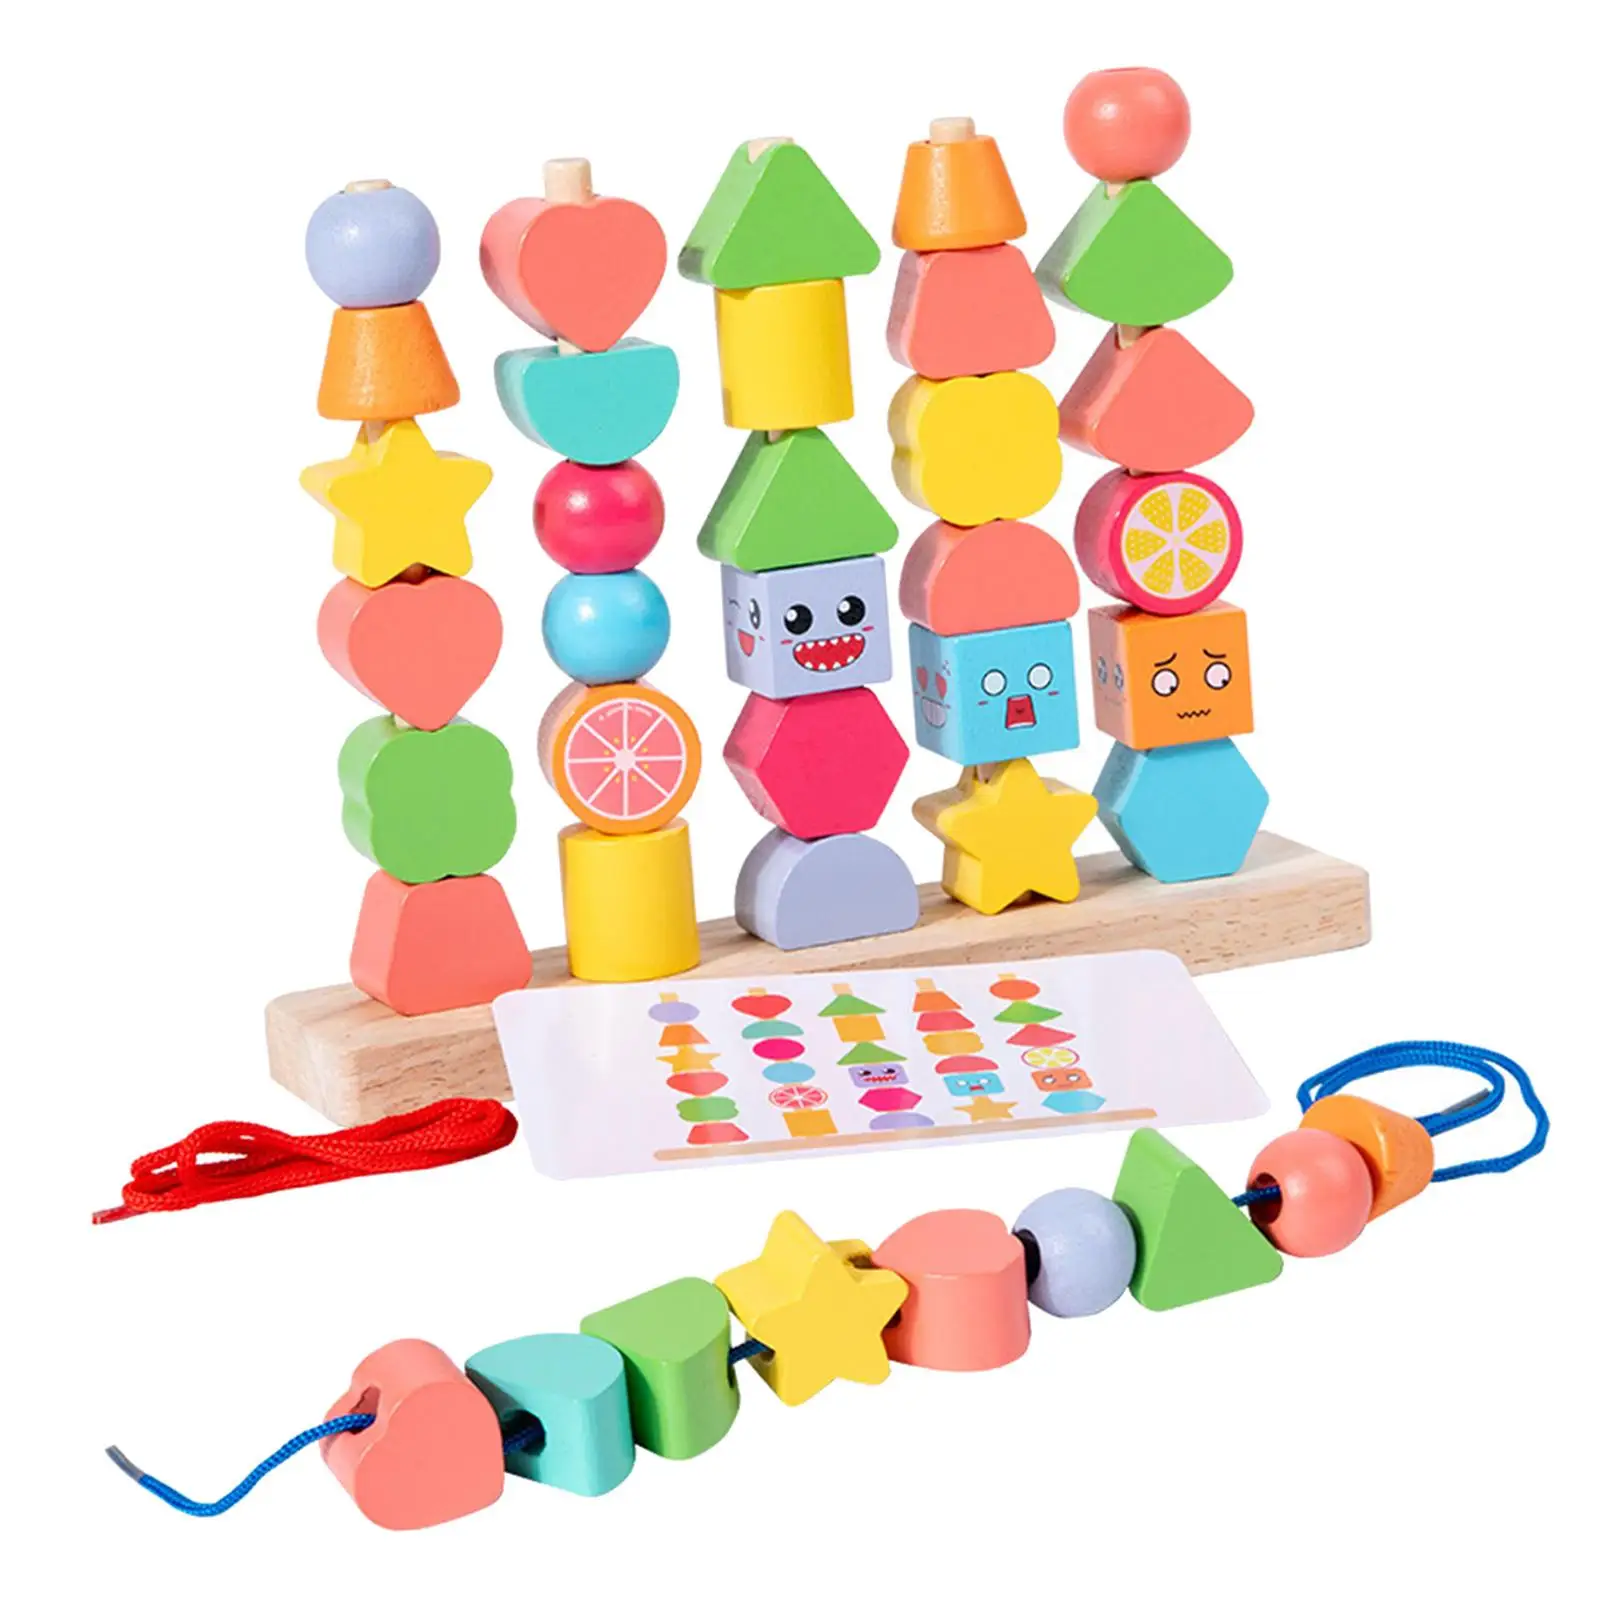 Montessori Wooden Beads Sequencing Toy Set Stem Matching Shapes Stacking Toy for Preschool Kids Children Birthday Gift